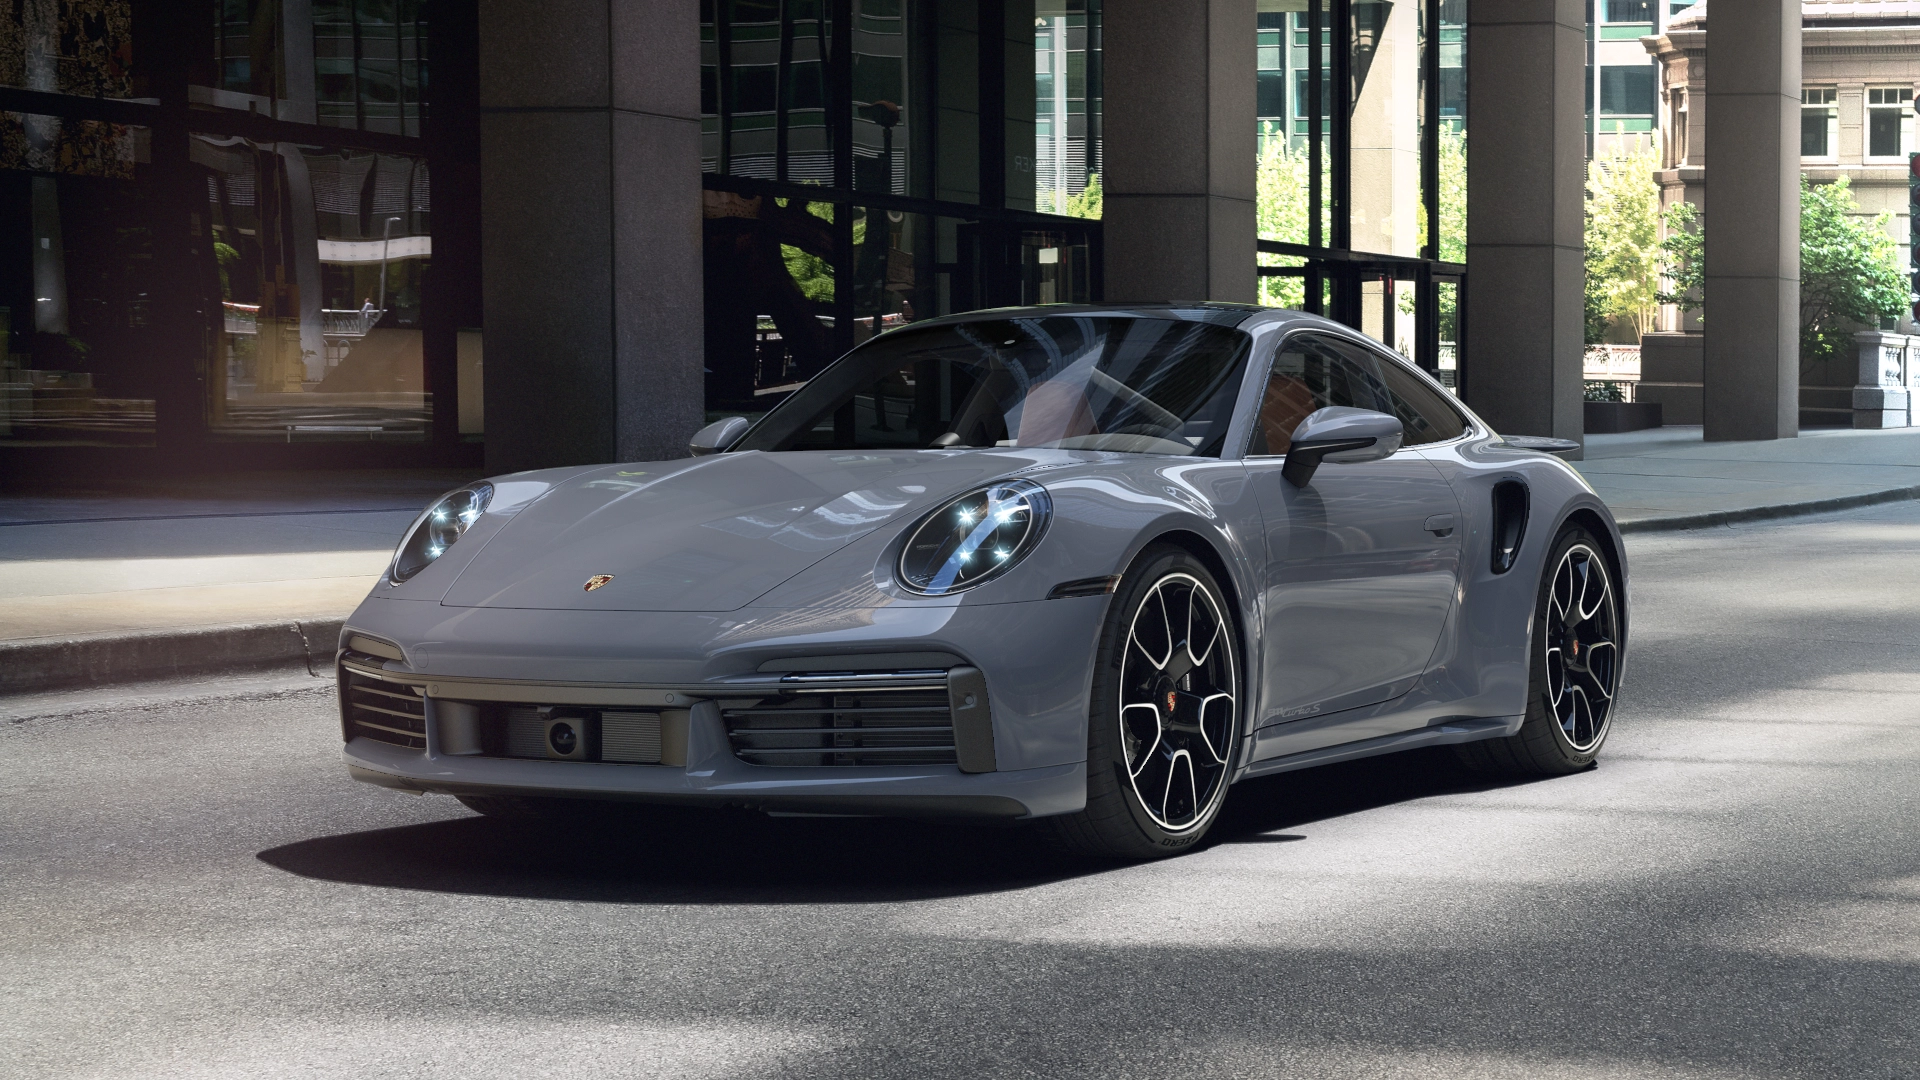 911 Turbo S front view